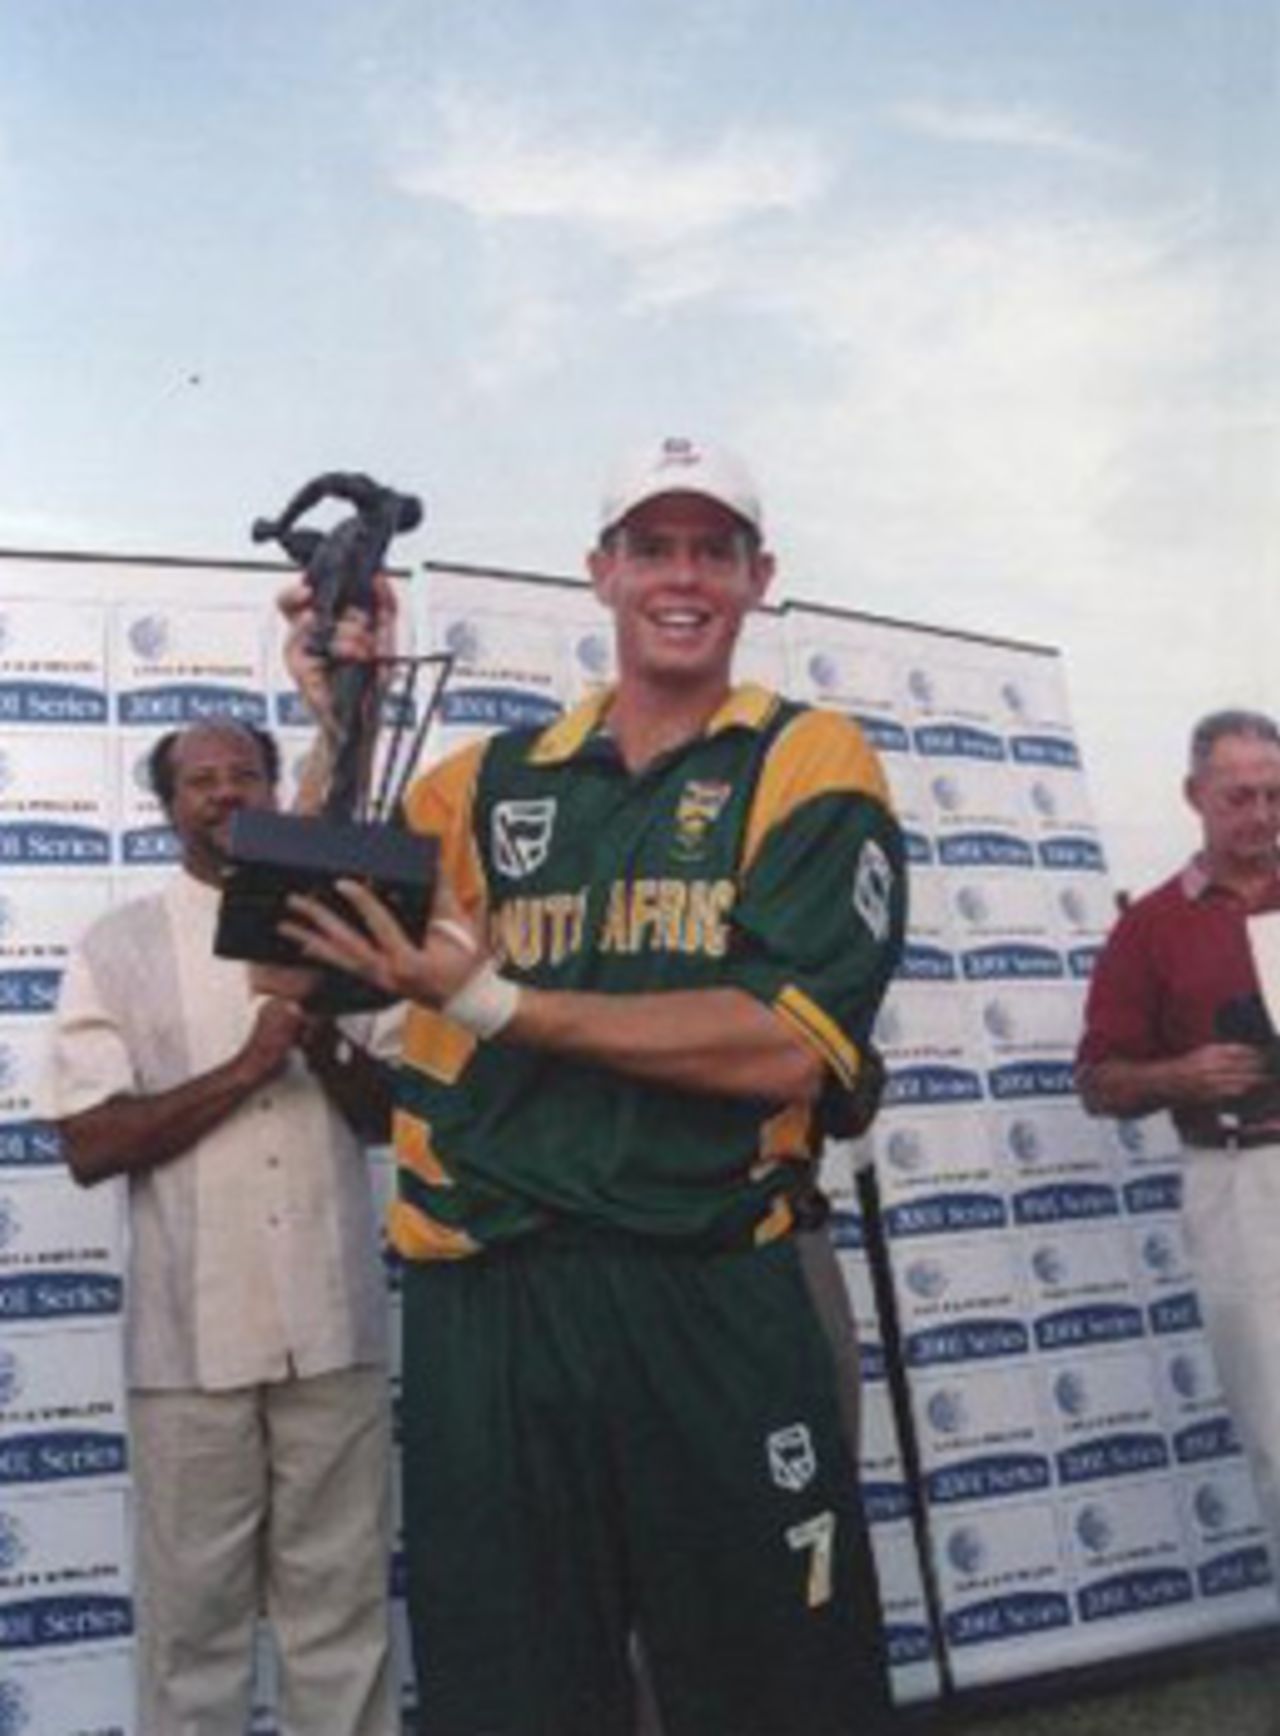 Pollock holding the trophy, 7th ODI West Indies v South Africa, at Arnos Vale Ground, Kingstown, St Vincent, 16 May 2001